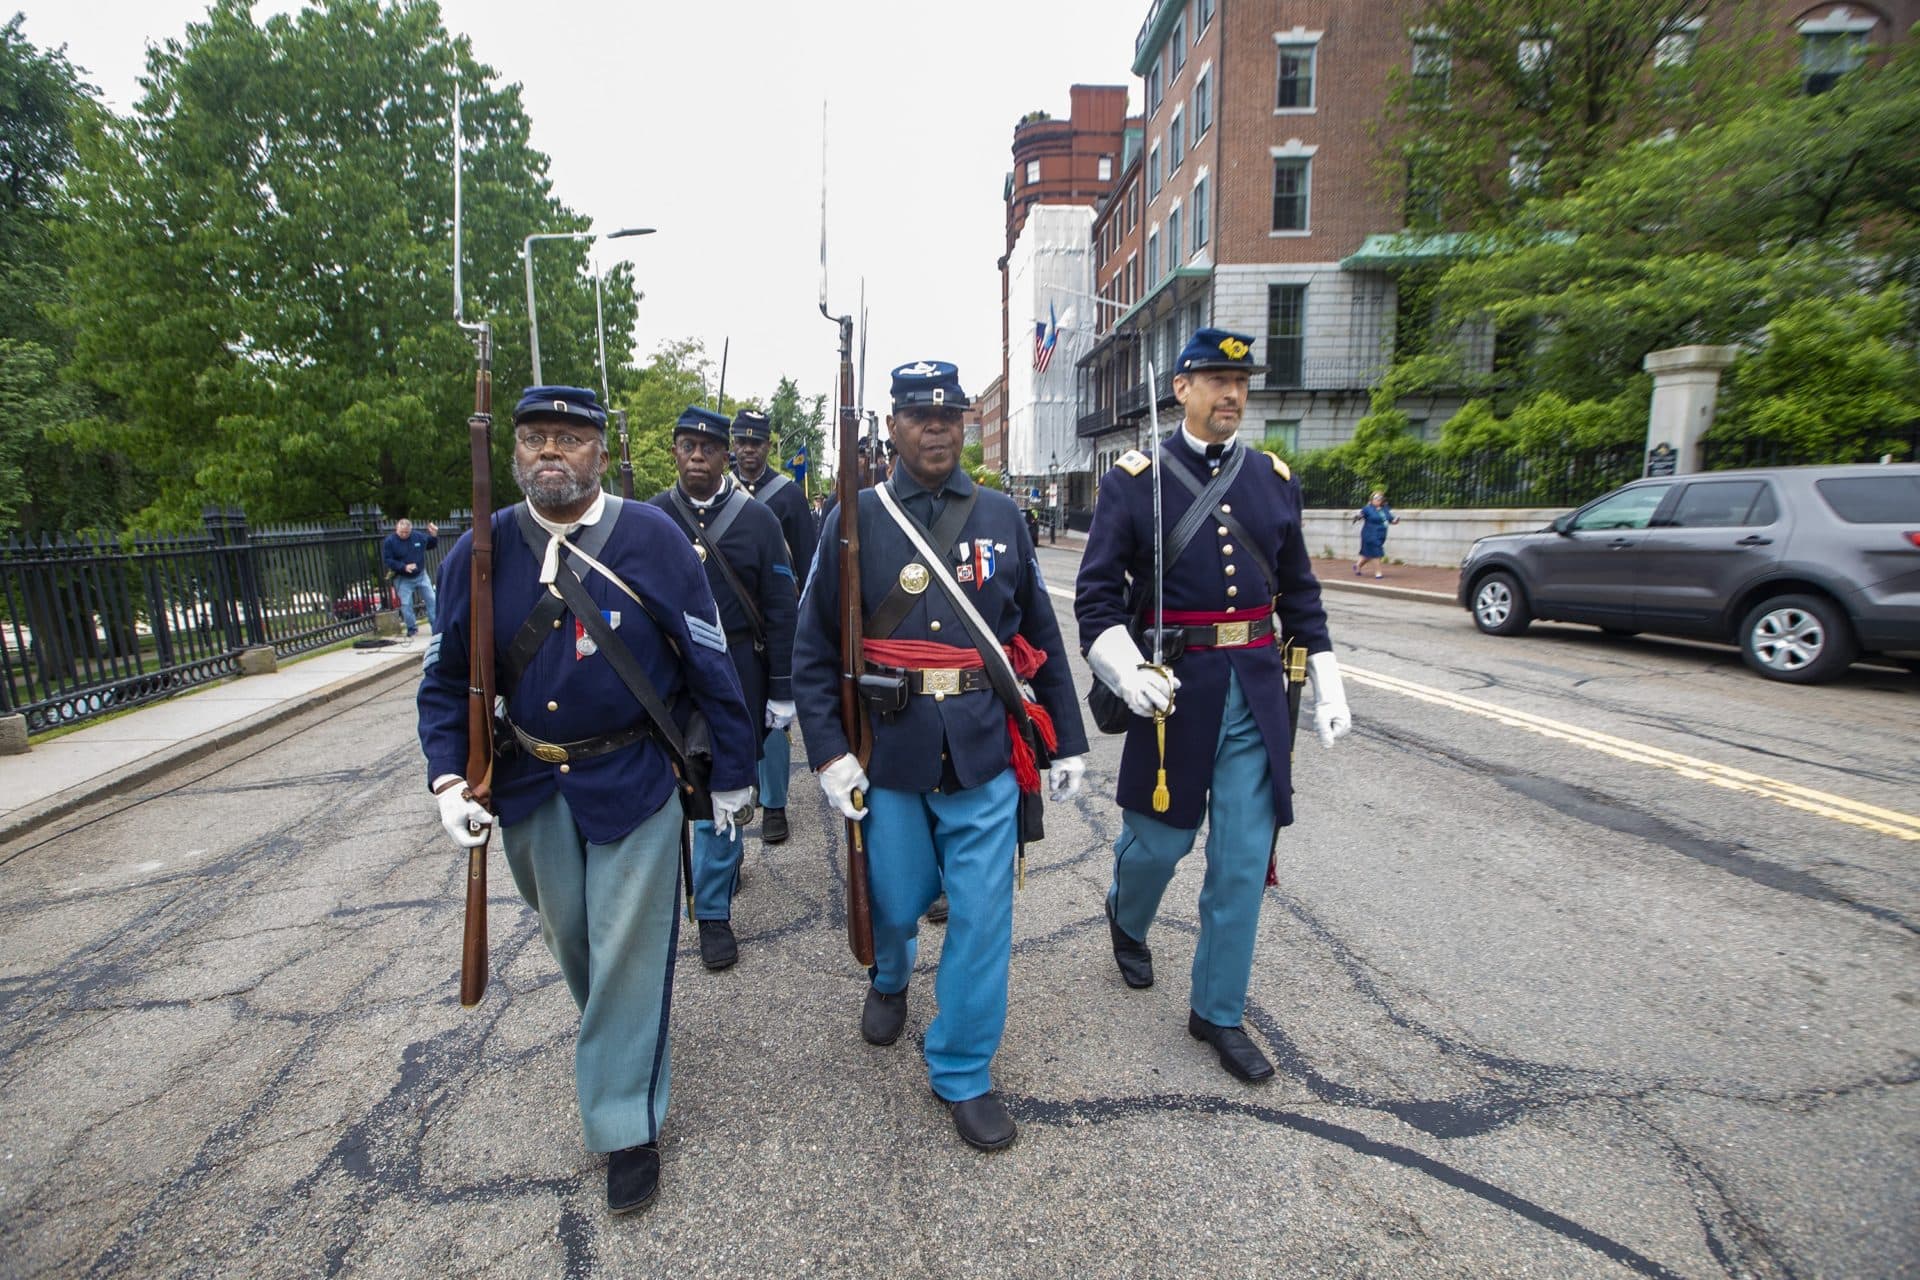 The procession of the 54th Massachusetts Volunteer Regiment marching up Beacon Street towards the Robert Gould Shaw and the 54th Regiment Memorial. (Jesse Costa/WBUR)